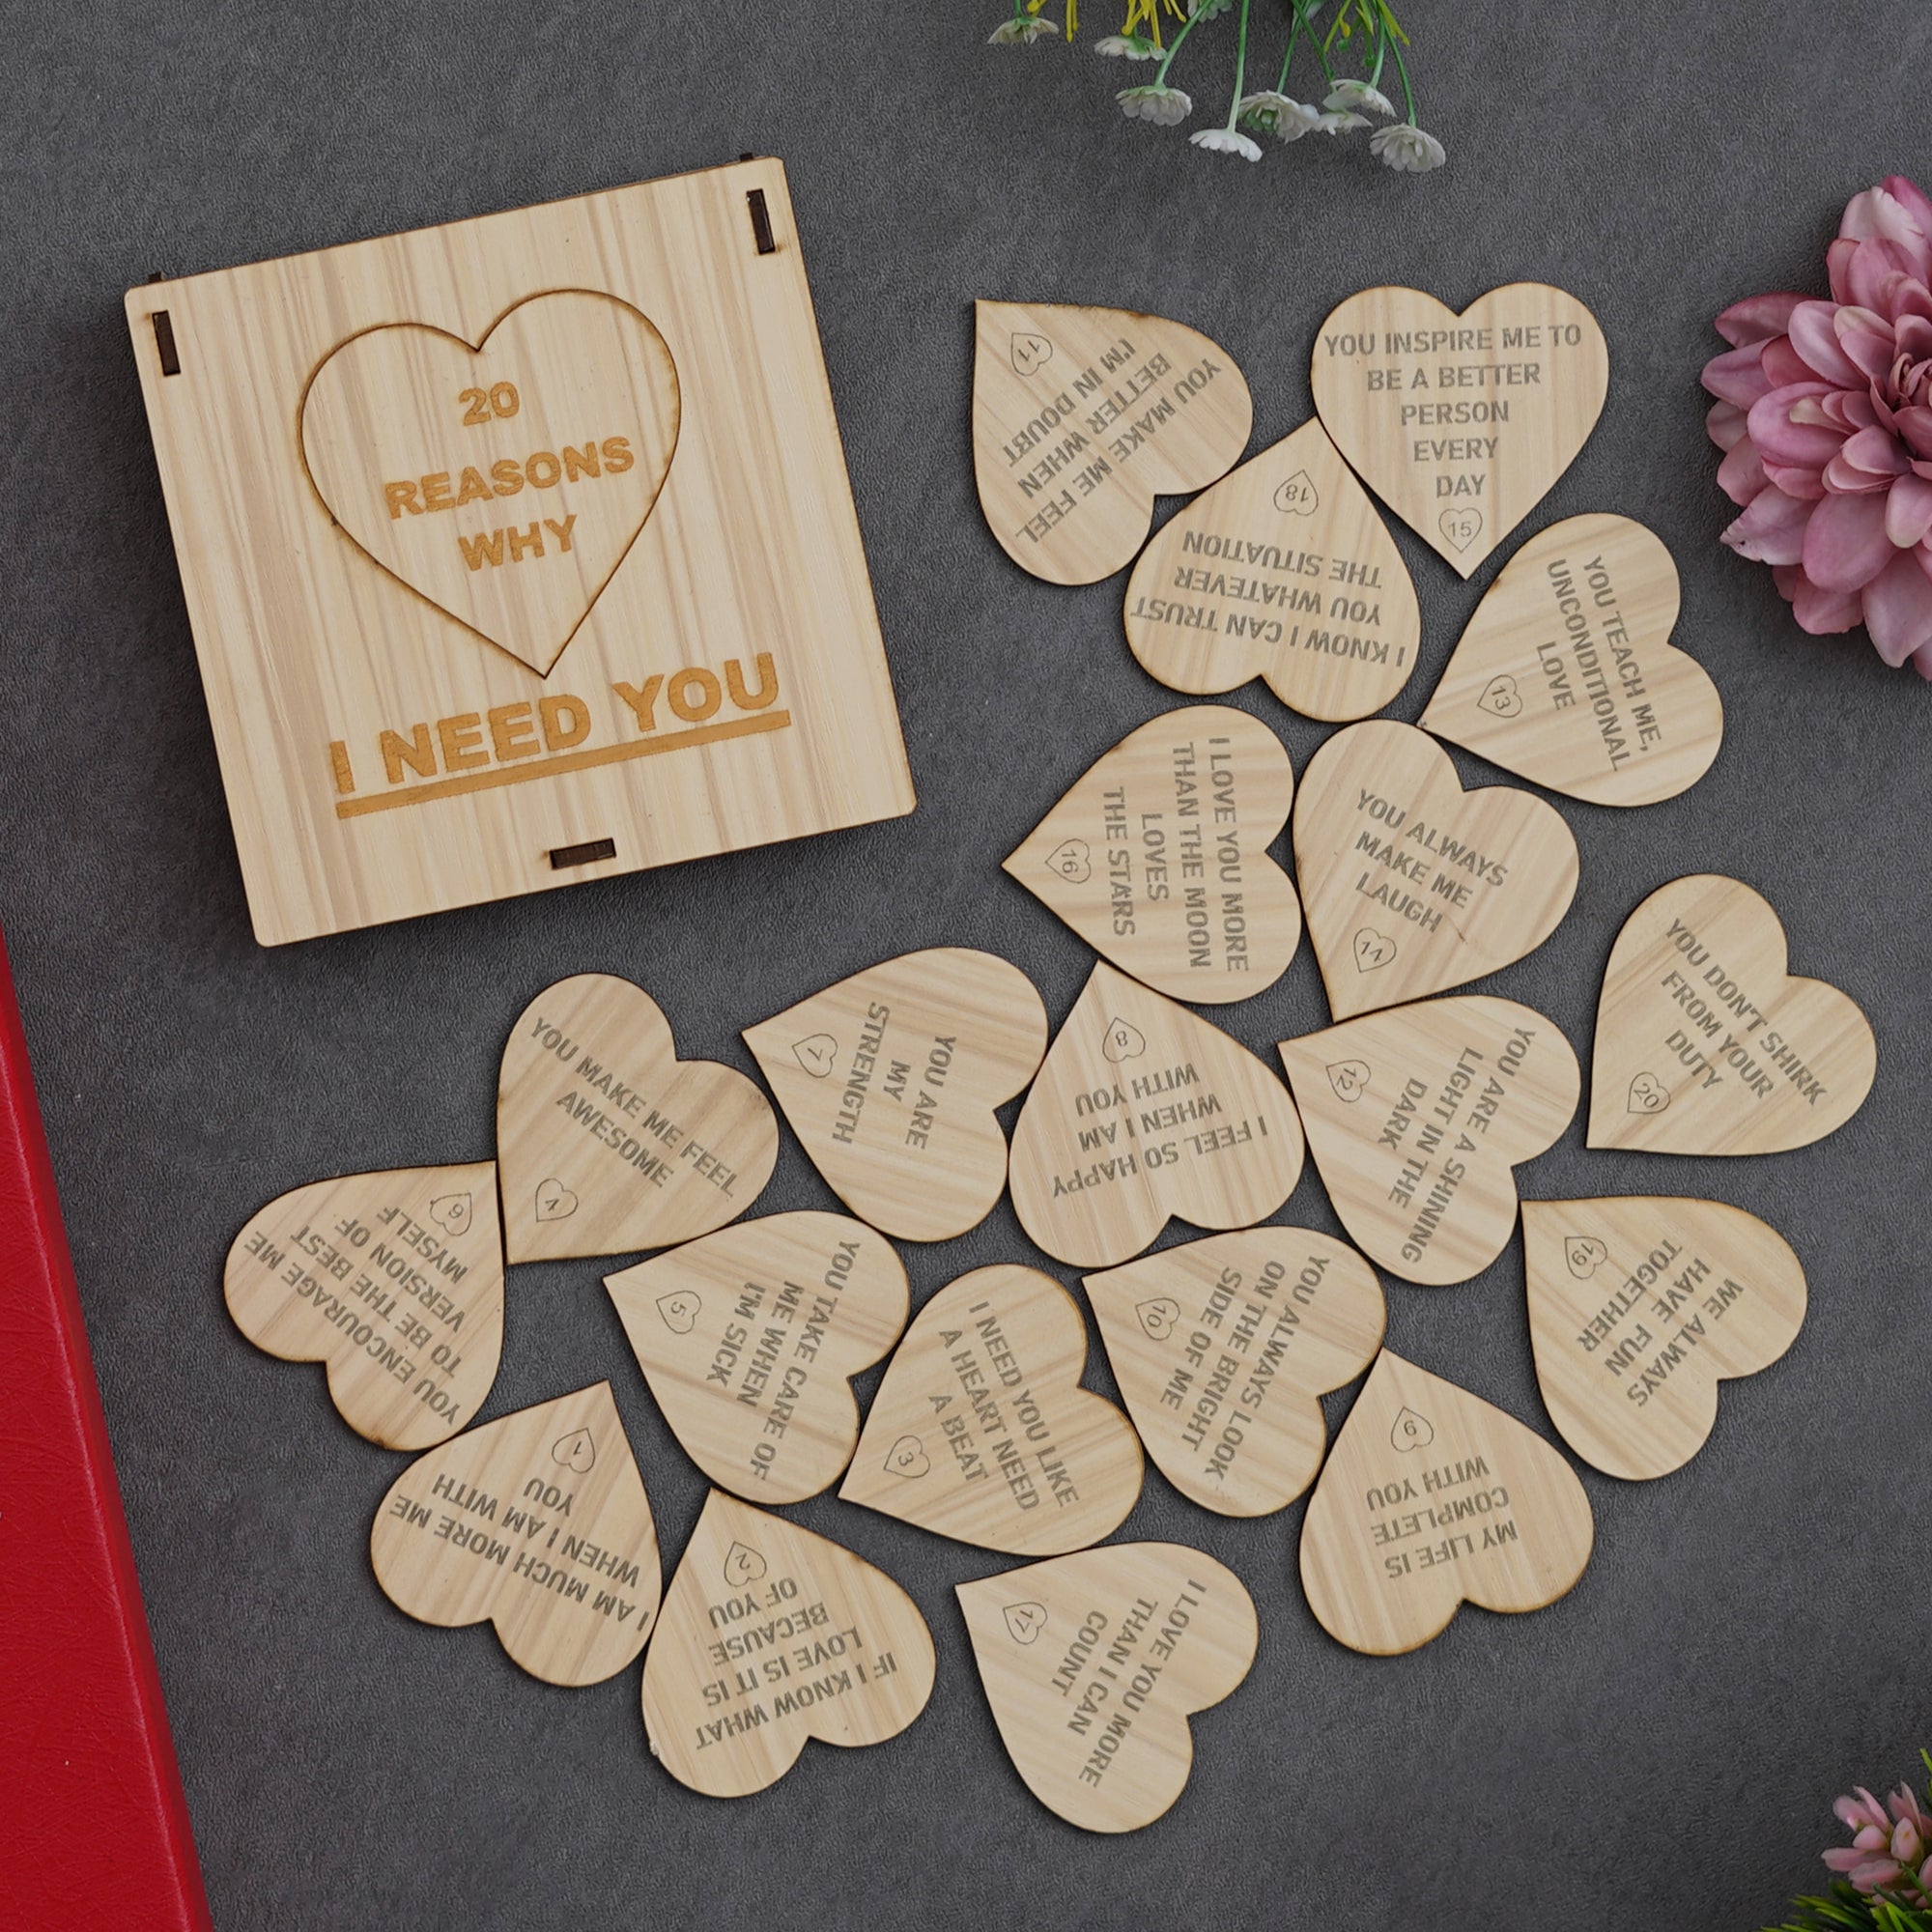 Valentine Combo of Card, "20 Reasons Why I Need You" Printed on Little Hearts Wooden Gift Set, Pink Heart Shaped Gift Box with Teddy and Roses 3